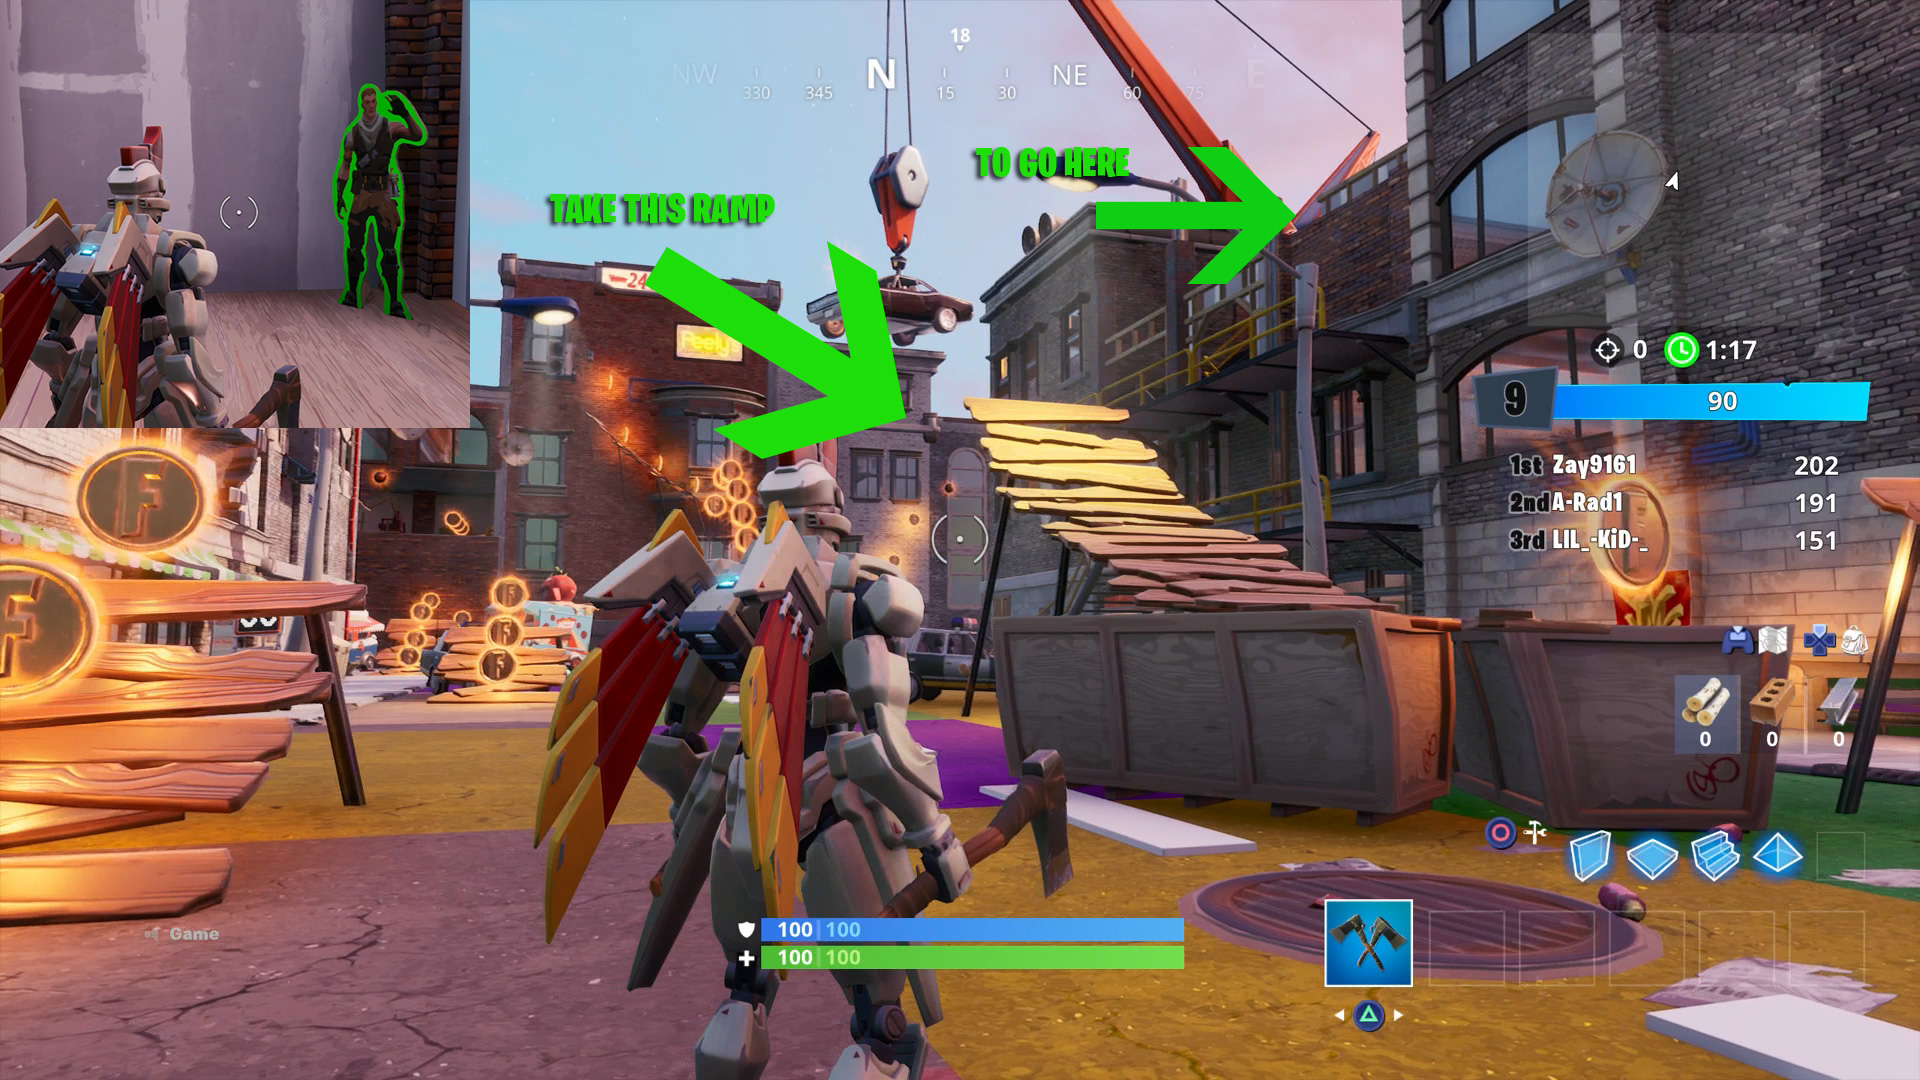 Find Jonesy Near The Basketball Court In Fortnite Fortnite How To Find Jonesy Near The Basketball Court Near The Rooftops And In The Back Of A Truck Attack Of The Fanboy